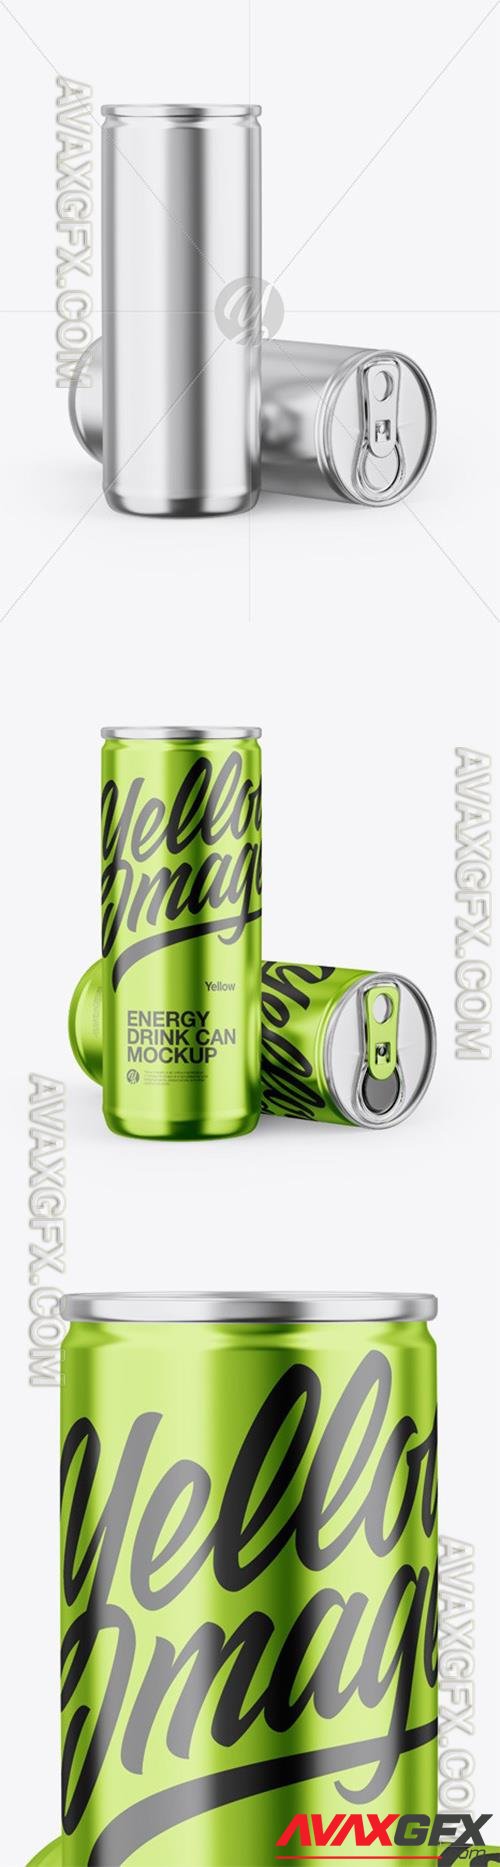 Two Glossy Metallic Cans Mockup 46079 TIF